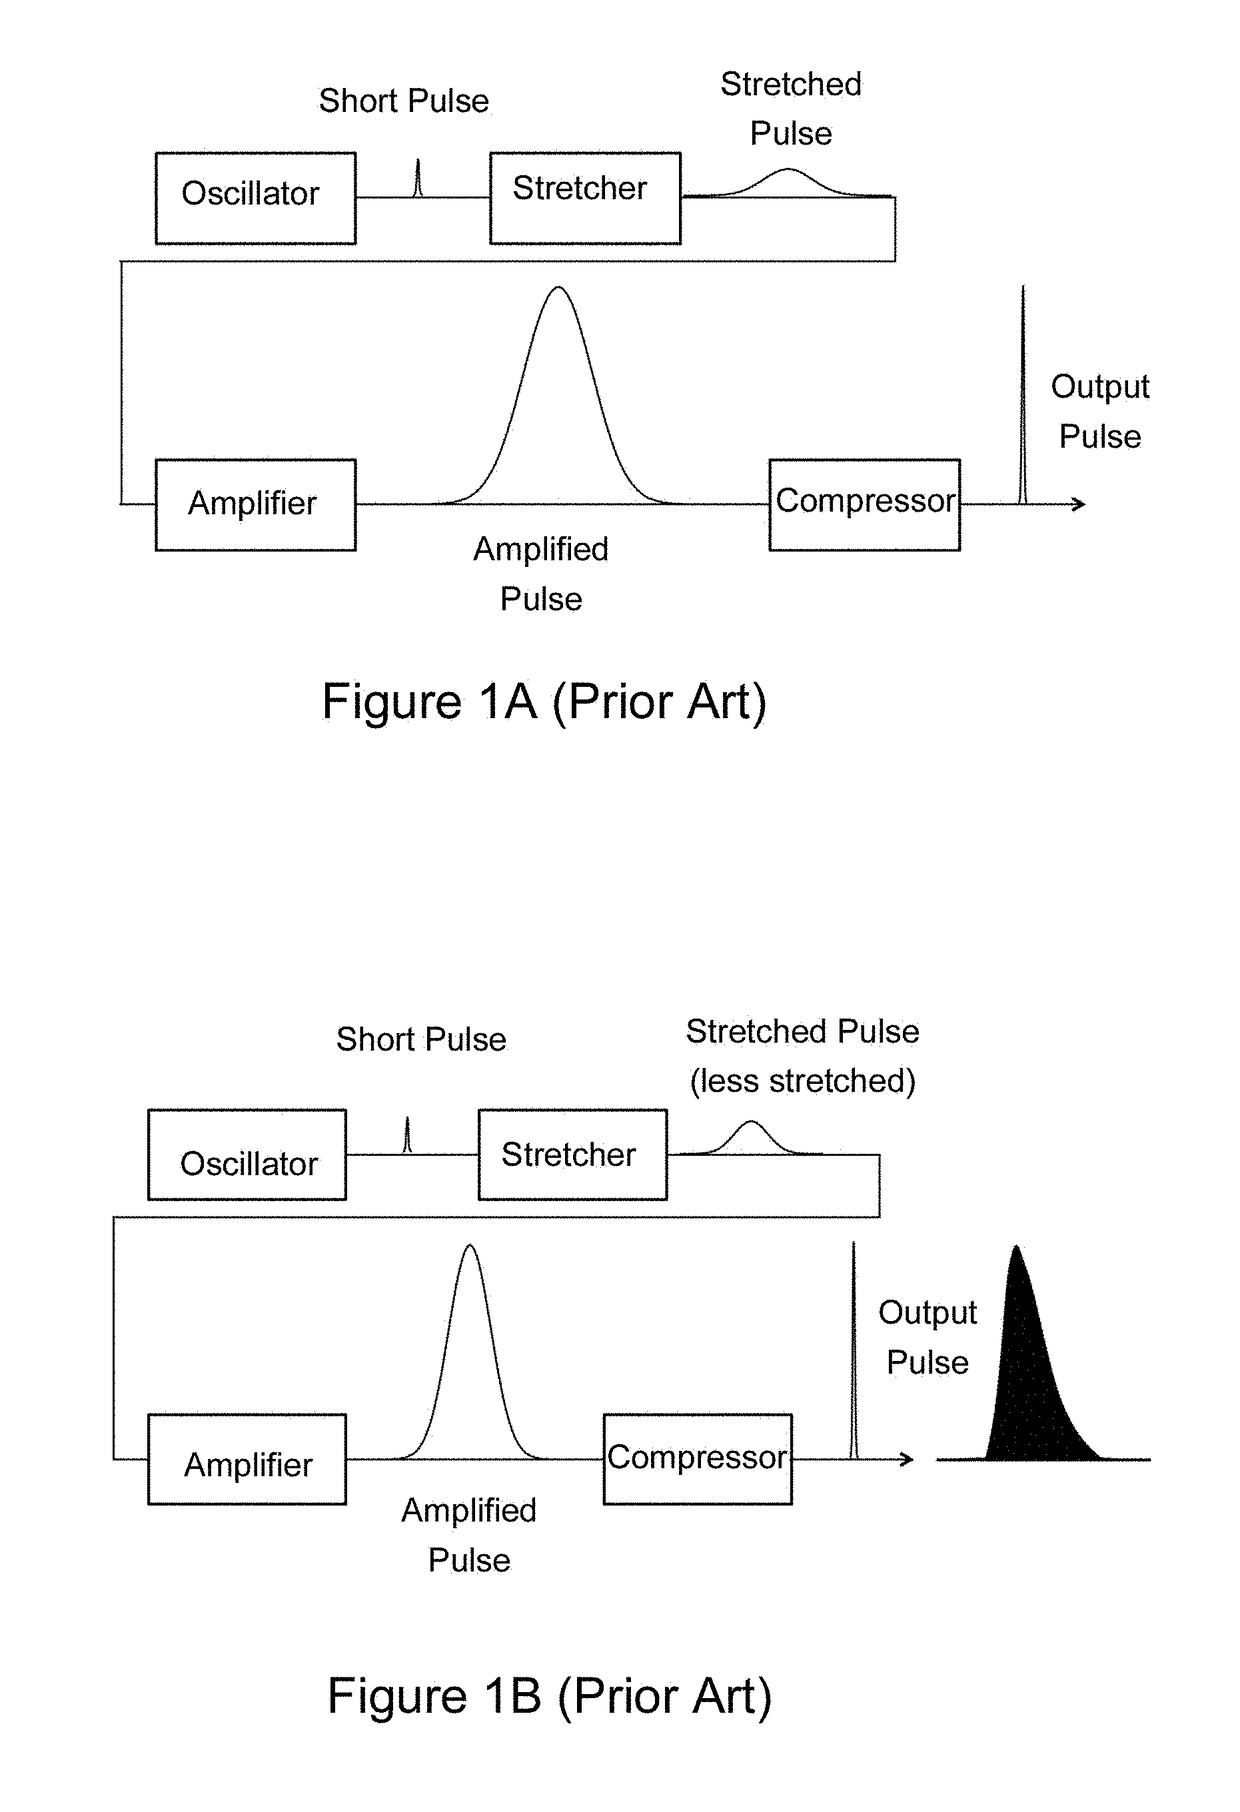 Single pass amplification of dissipative soliton-like seed pulses